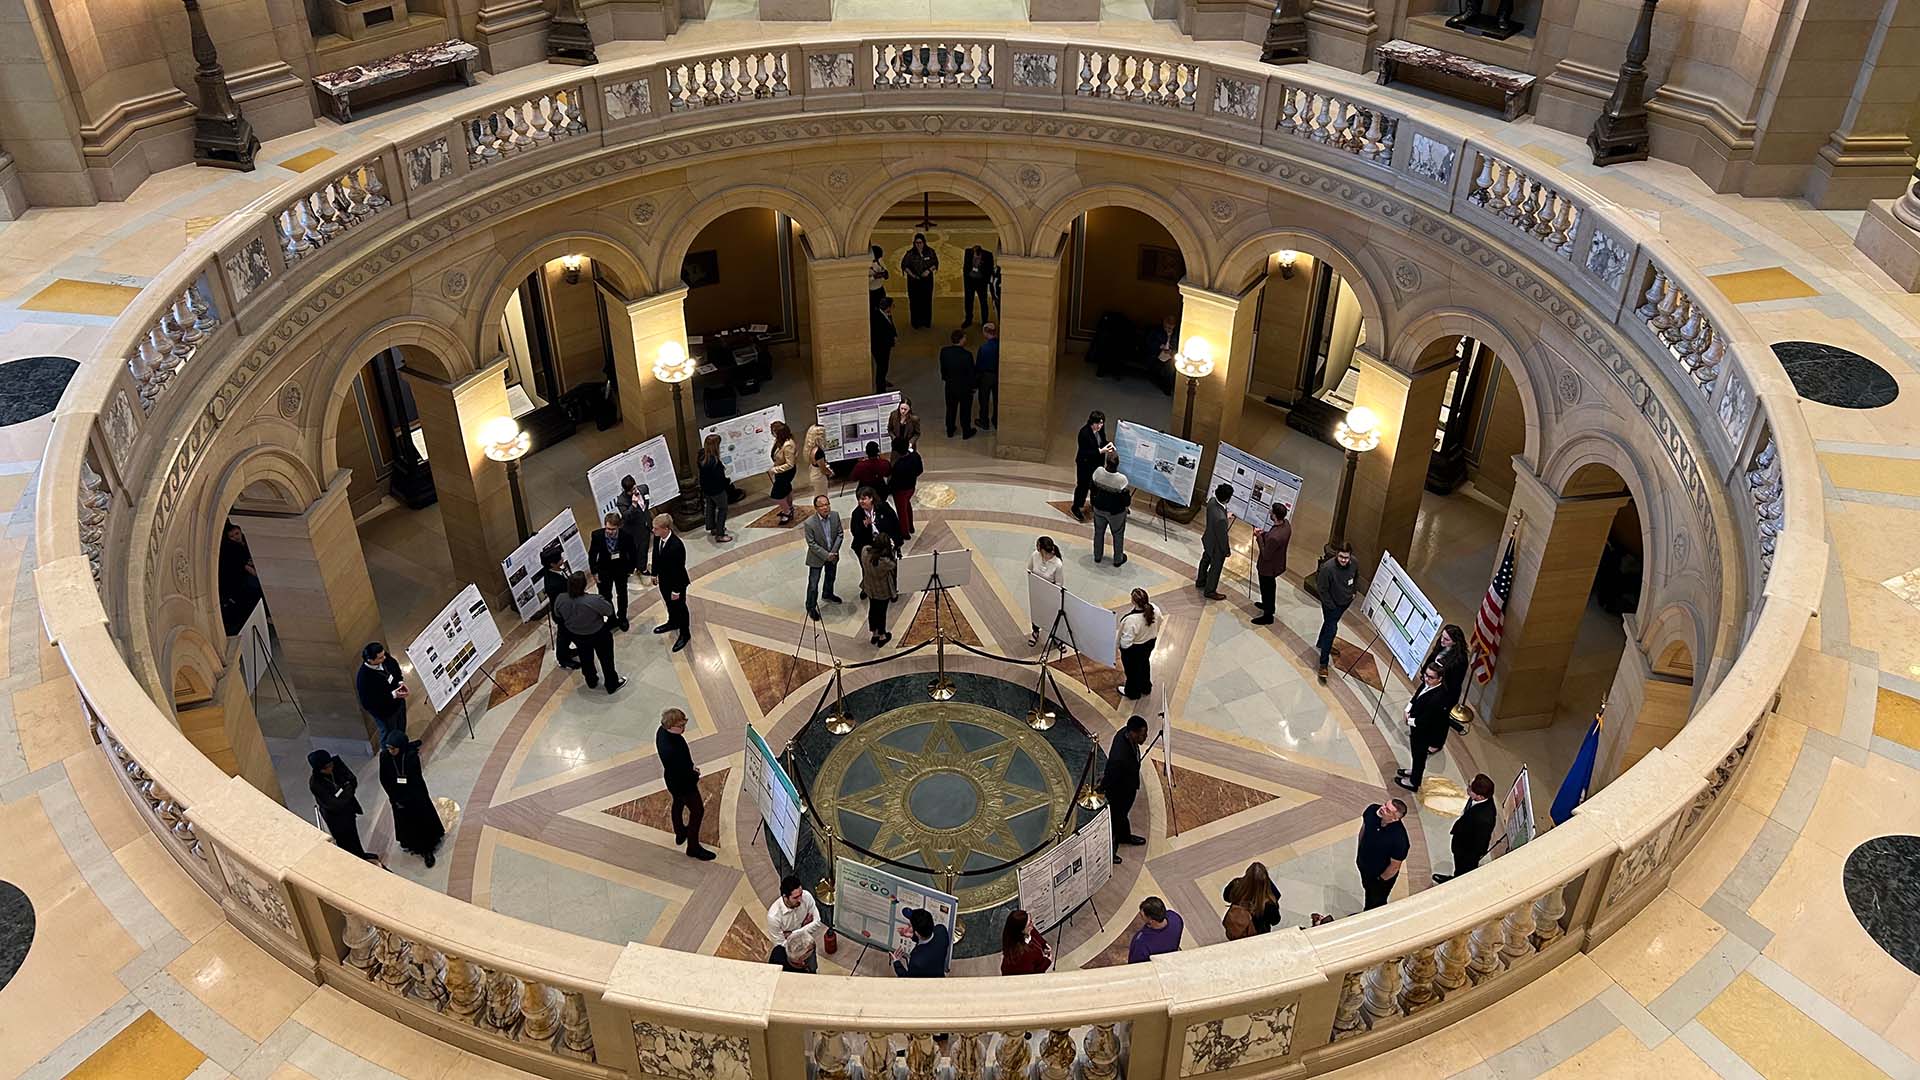 A view from above of posters on display in the Minnesota State Capitol rotunda. Posters are arranged around a large star pattern in the rotunda's floor